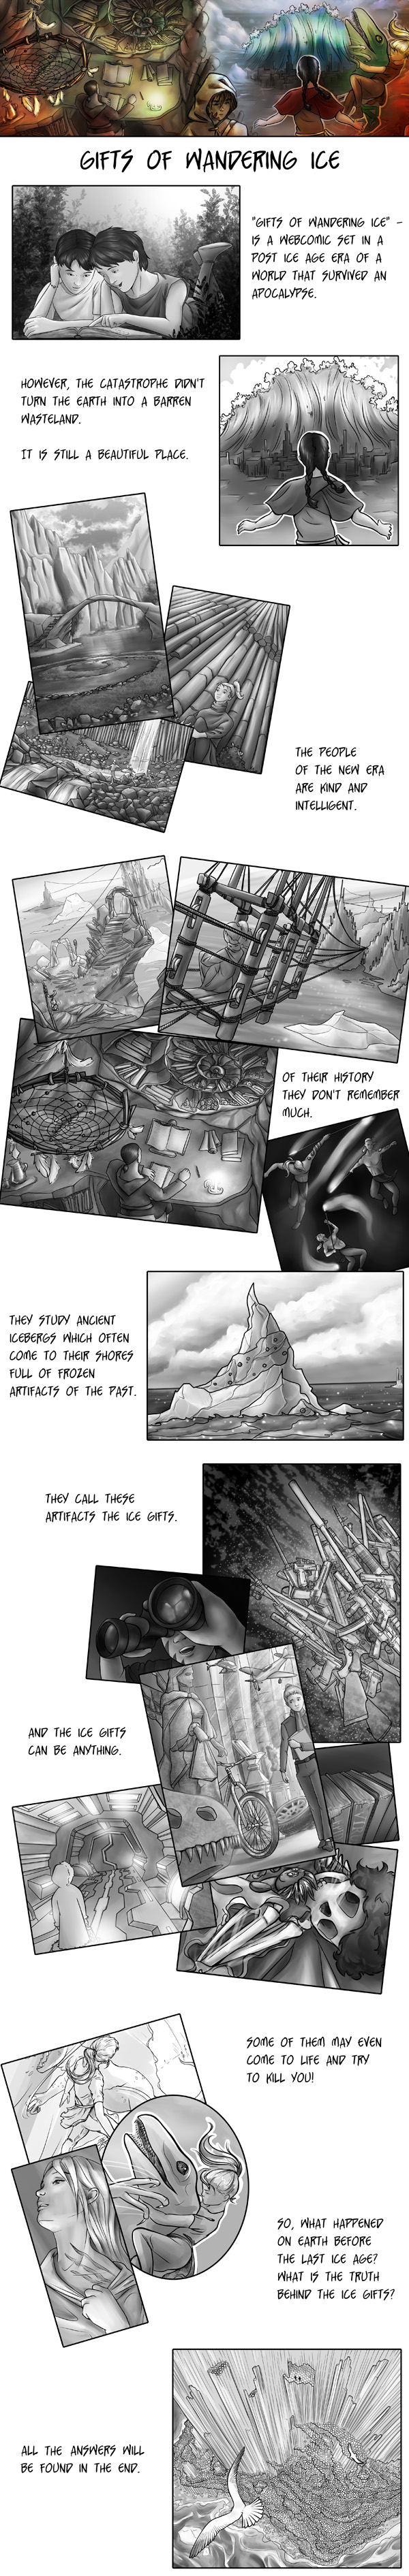 About Gifts of wandering ice - postapocalyptic scifi webcomic